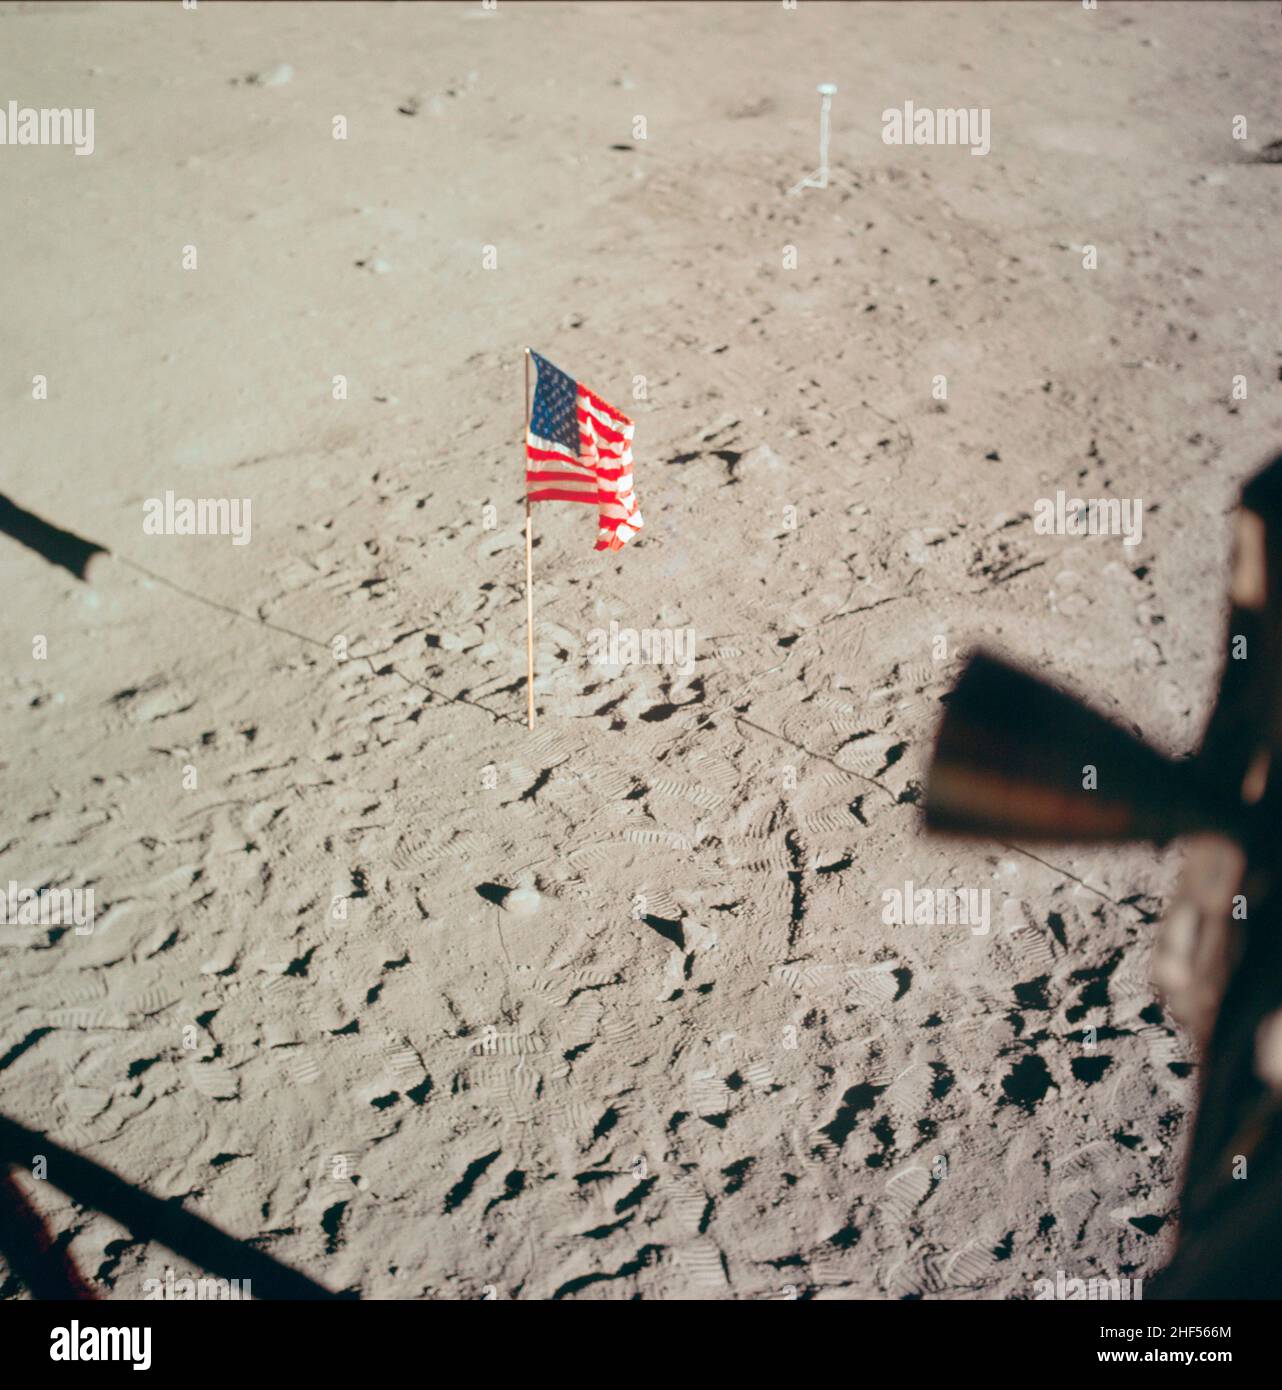 The flag of the United States and the footprints of astronauts Neil A. Armstrong and Edwin E. Aldrin Jr., deployed on the surface of the moon. Apollo. Stock Photo